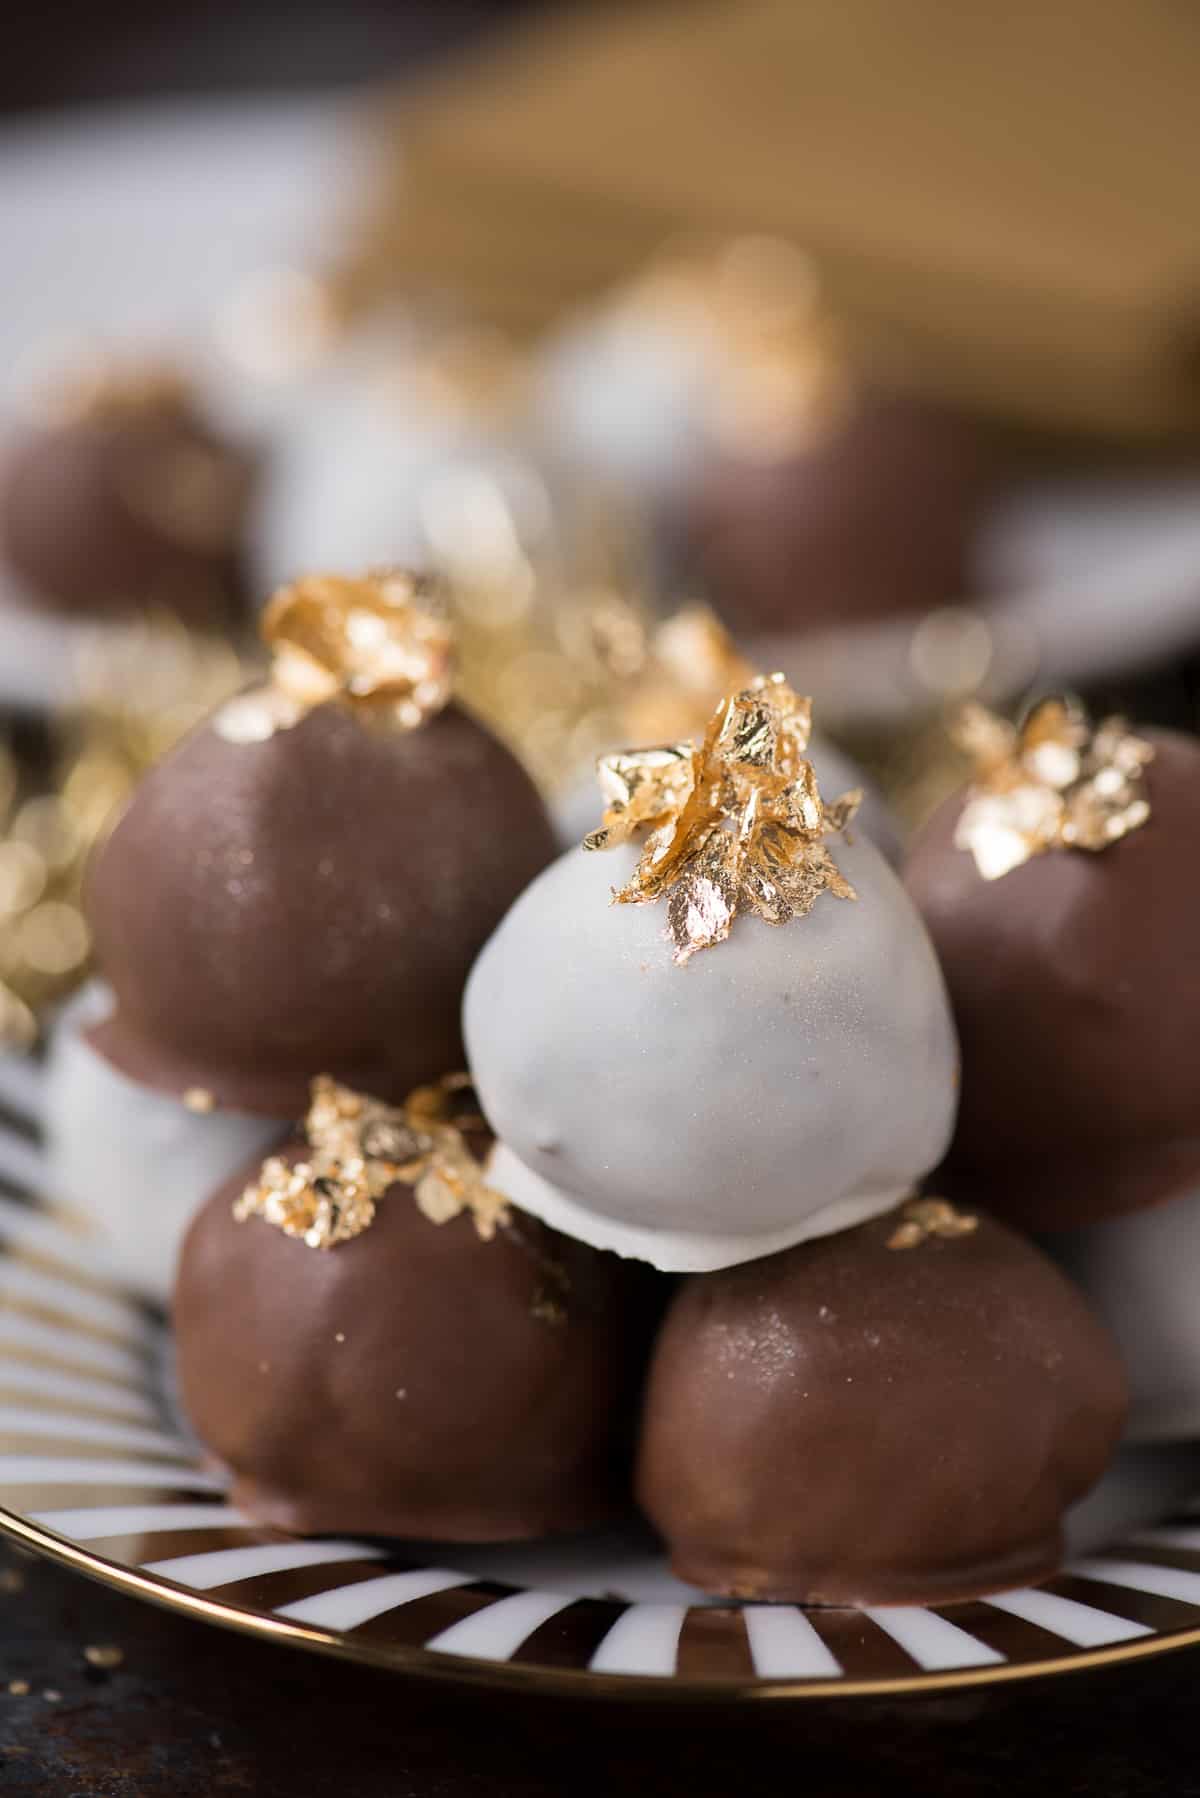 oreo balls displayed on gold striped plate with edible gold flakes on top